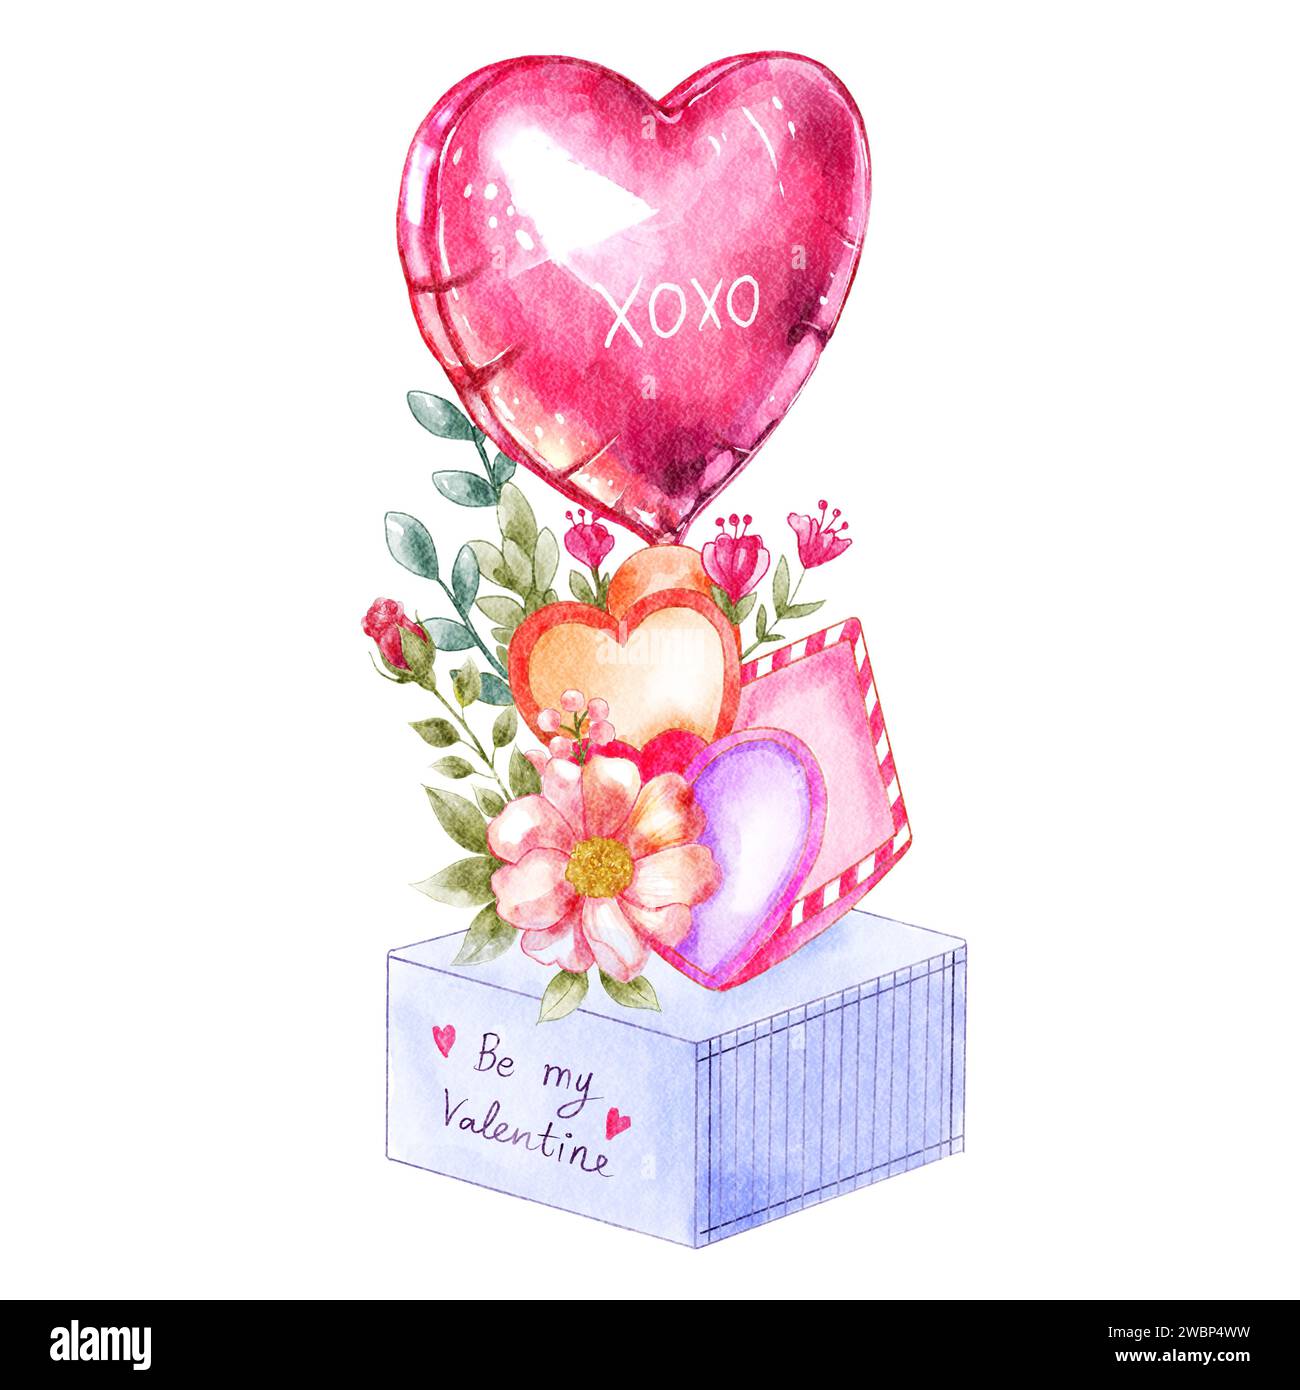 Heart shape balloon and flower decorated on gift box . Watercolor painting design . Valentine day concept . Isolated white background . Illustration . Stock Photo